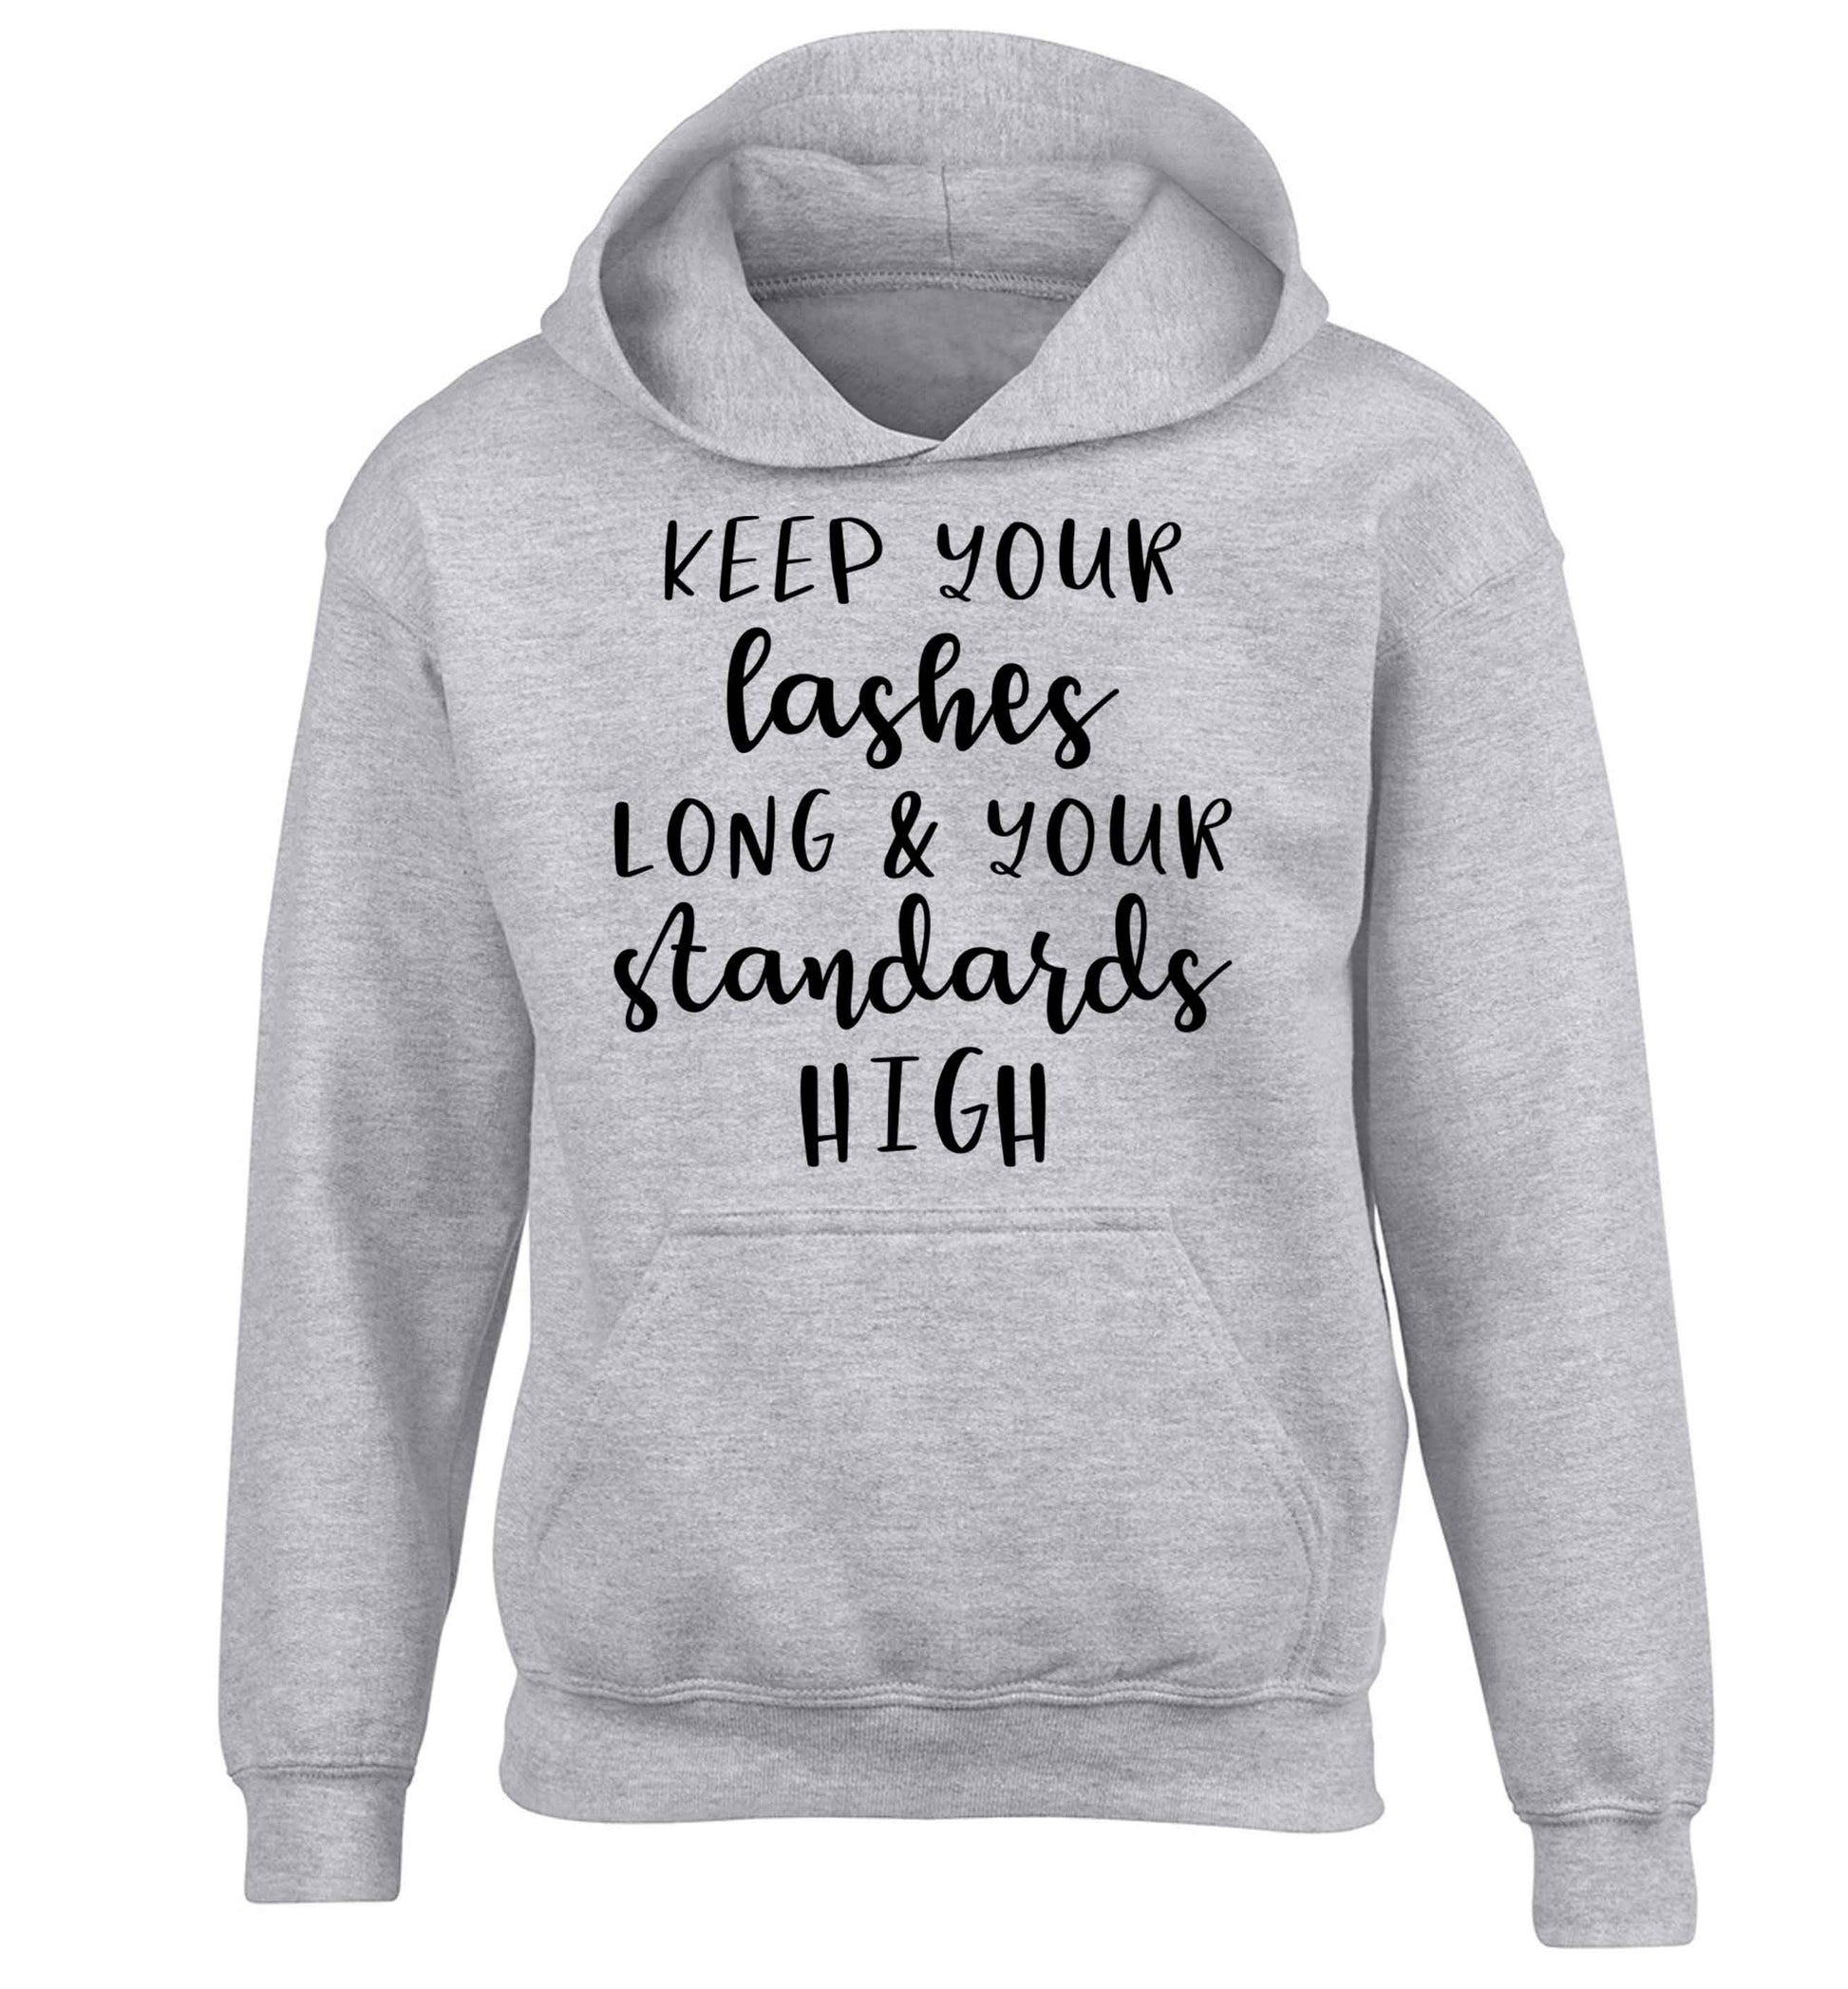 Keep your lashes long and your standards high children's grey hoodie 12-13 Years